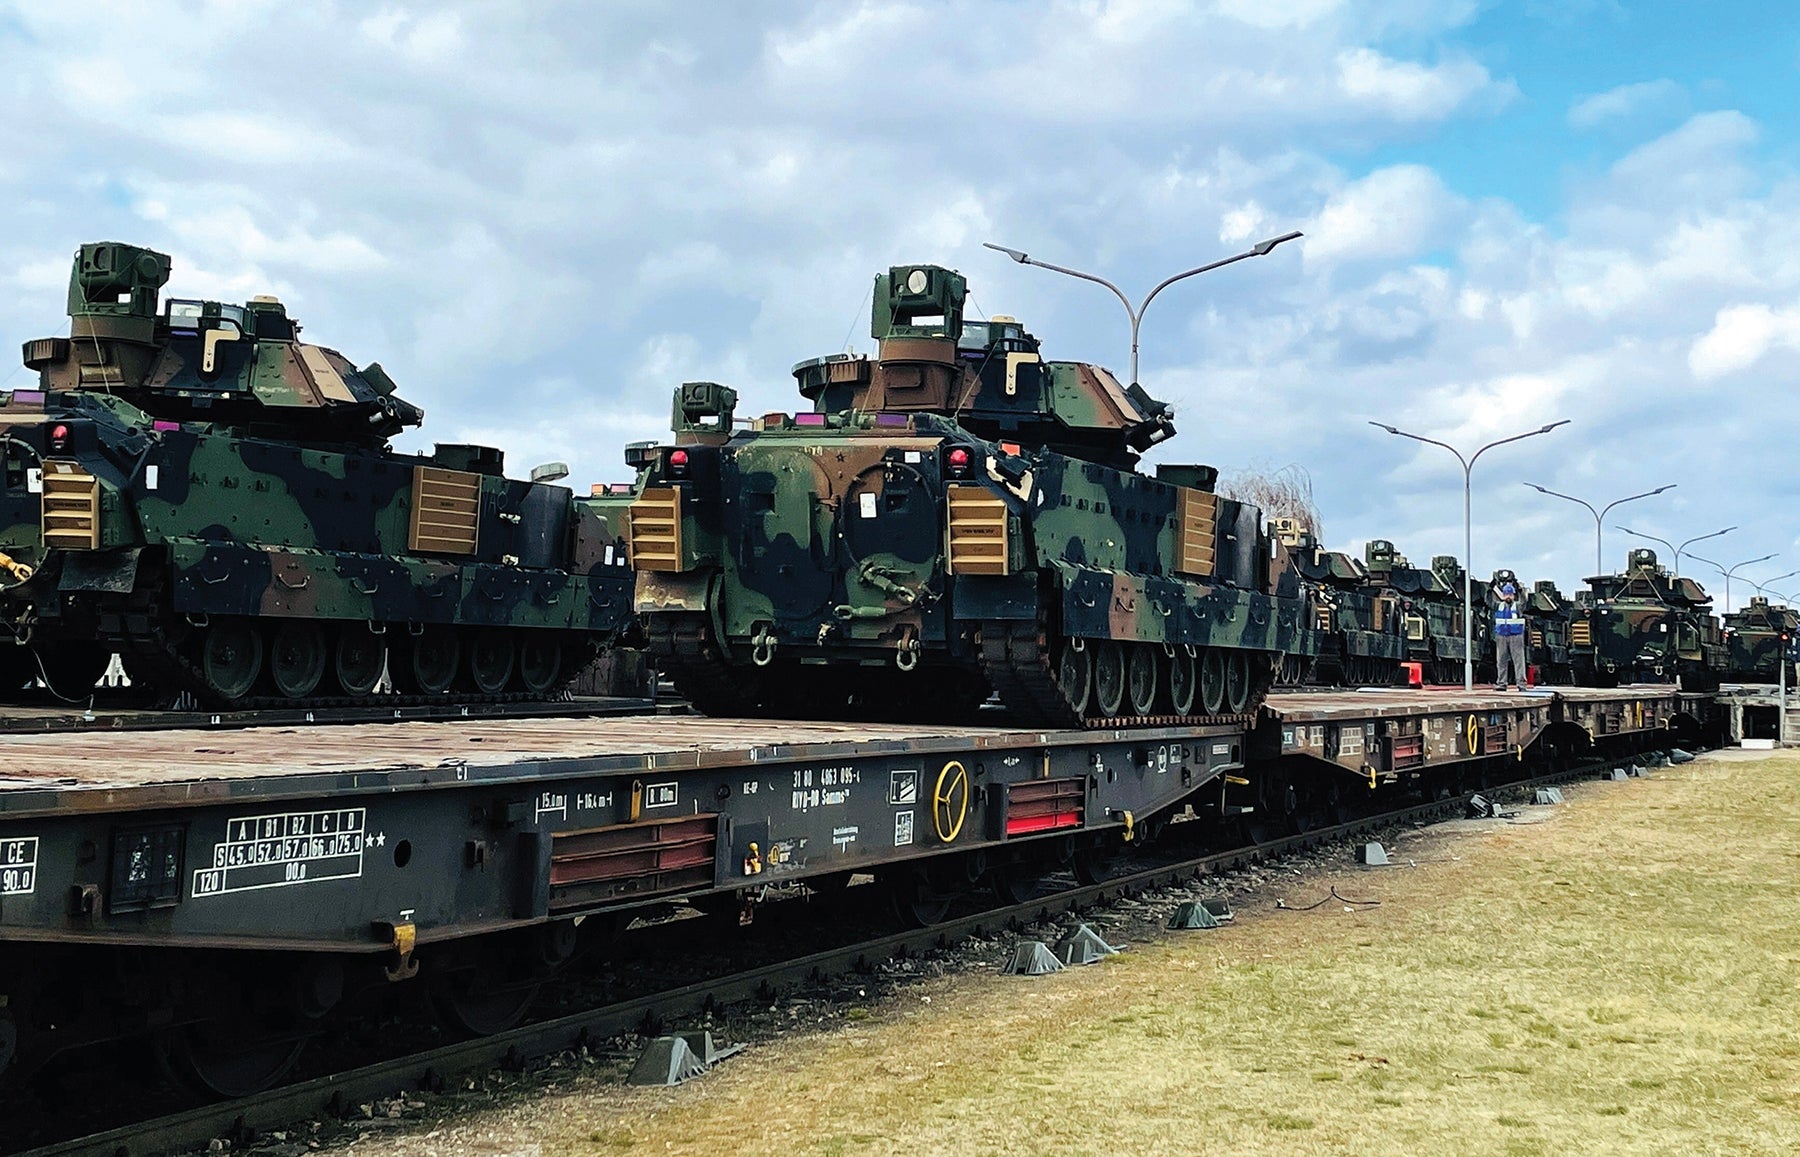  Above: Bradley Fighting Vehicles are loaded onto rail cars in Mannheim, Germany. (Credit: U.S. Army/Cameron Porter)